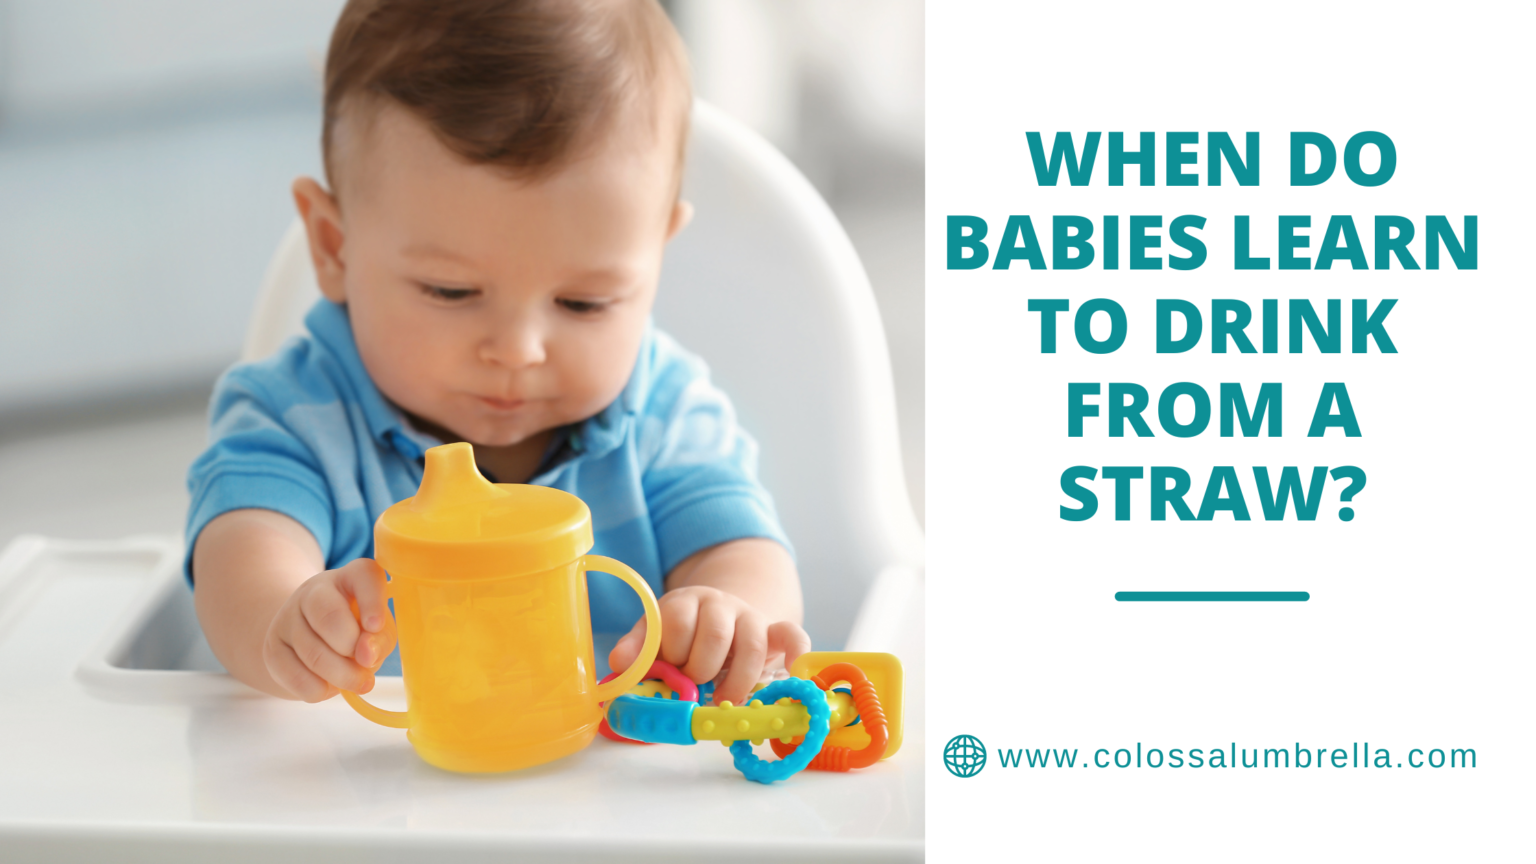 When Do Babies Learn to Drink From a Straw? - Important facts and key ...